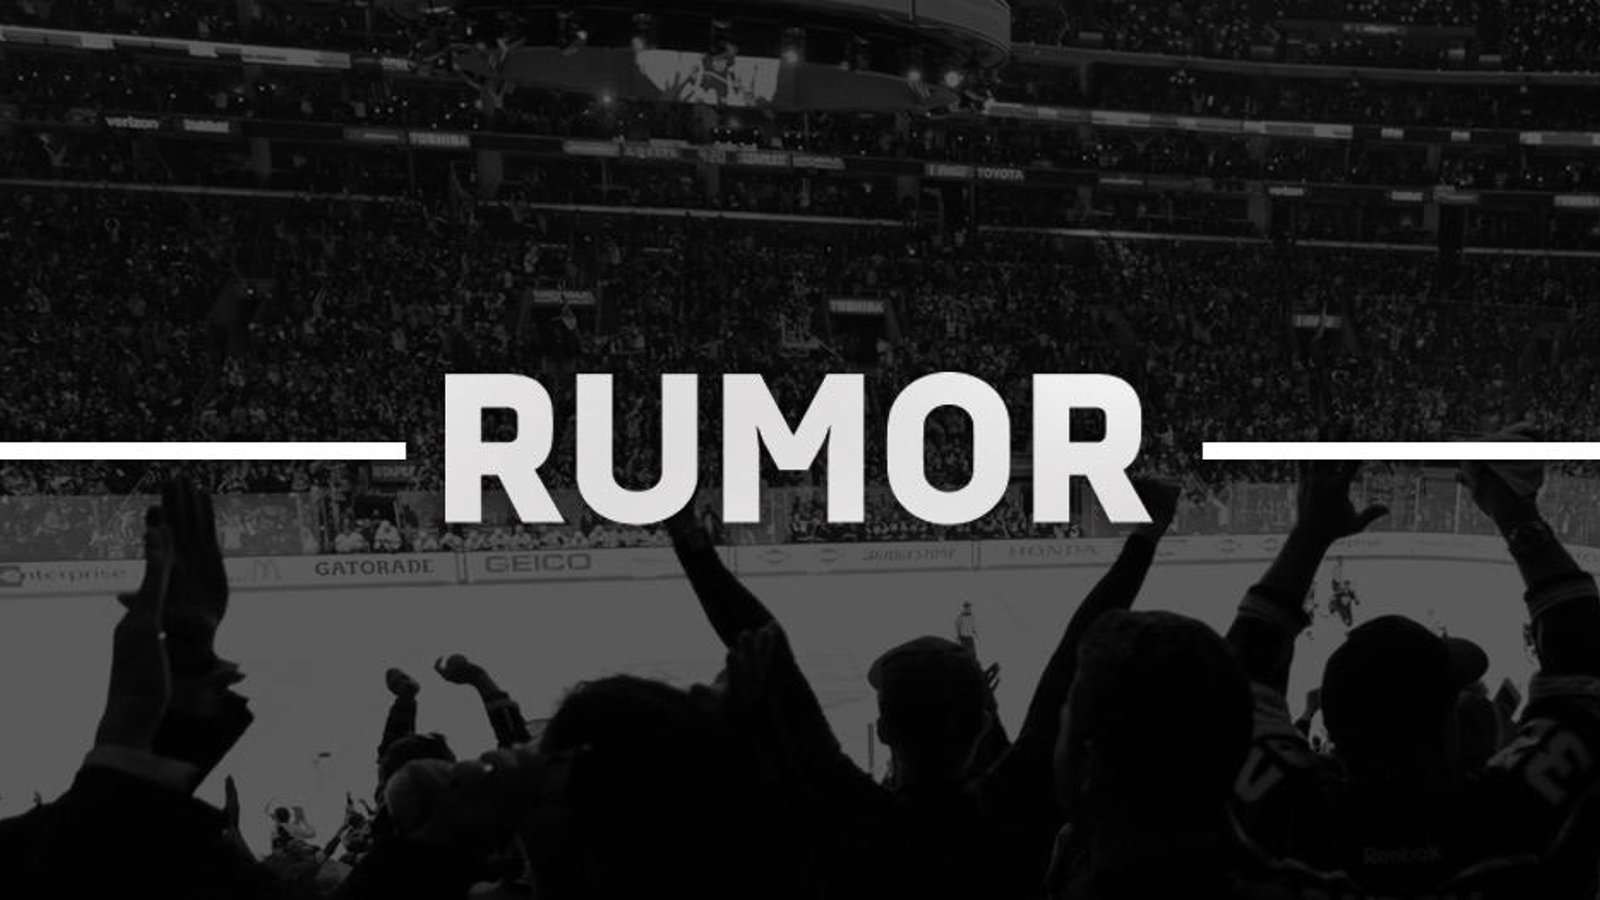 NHL GM admits he's looking to add two players.